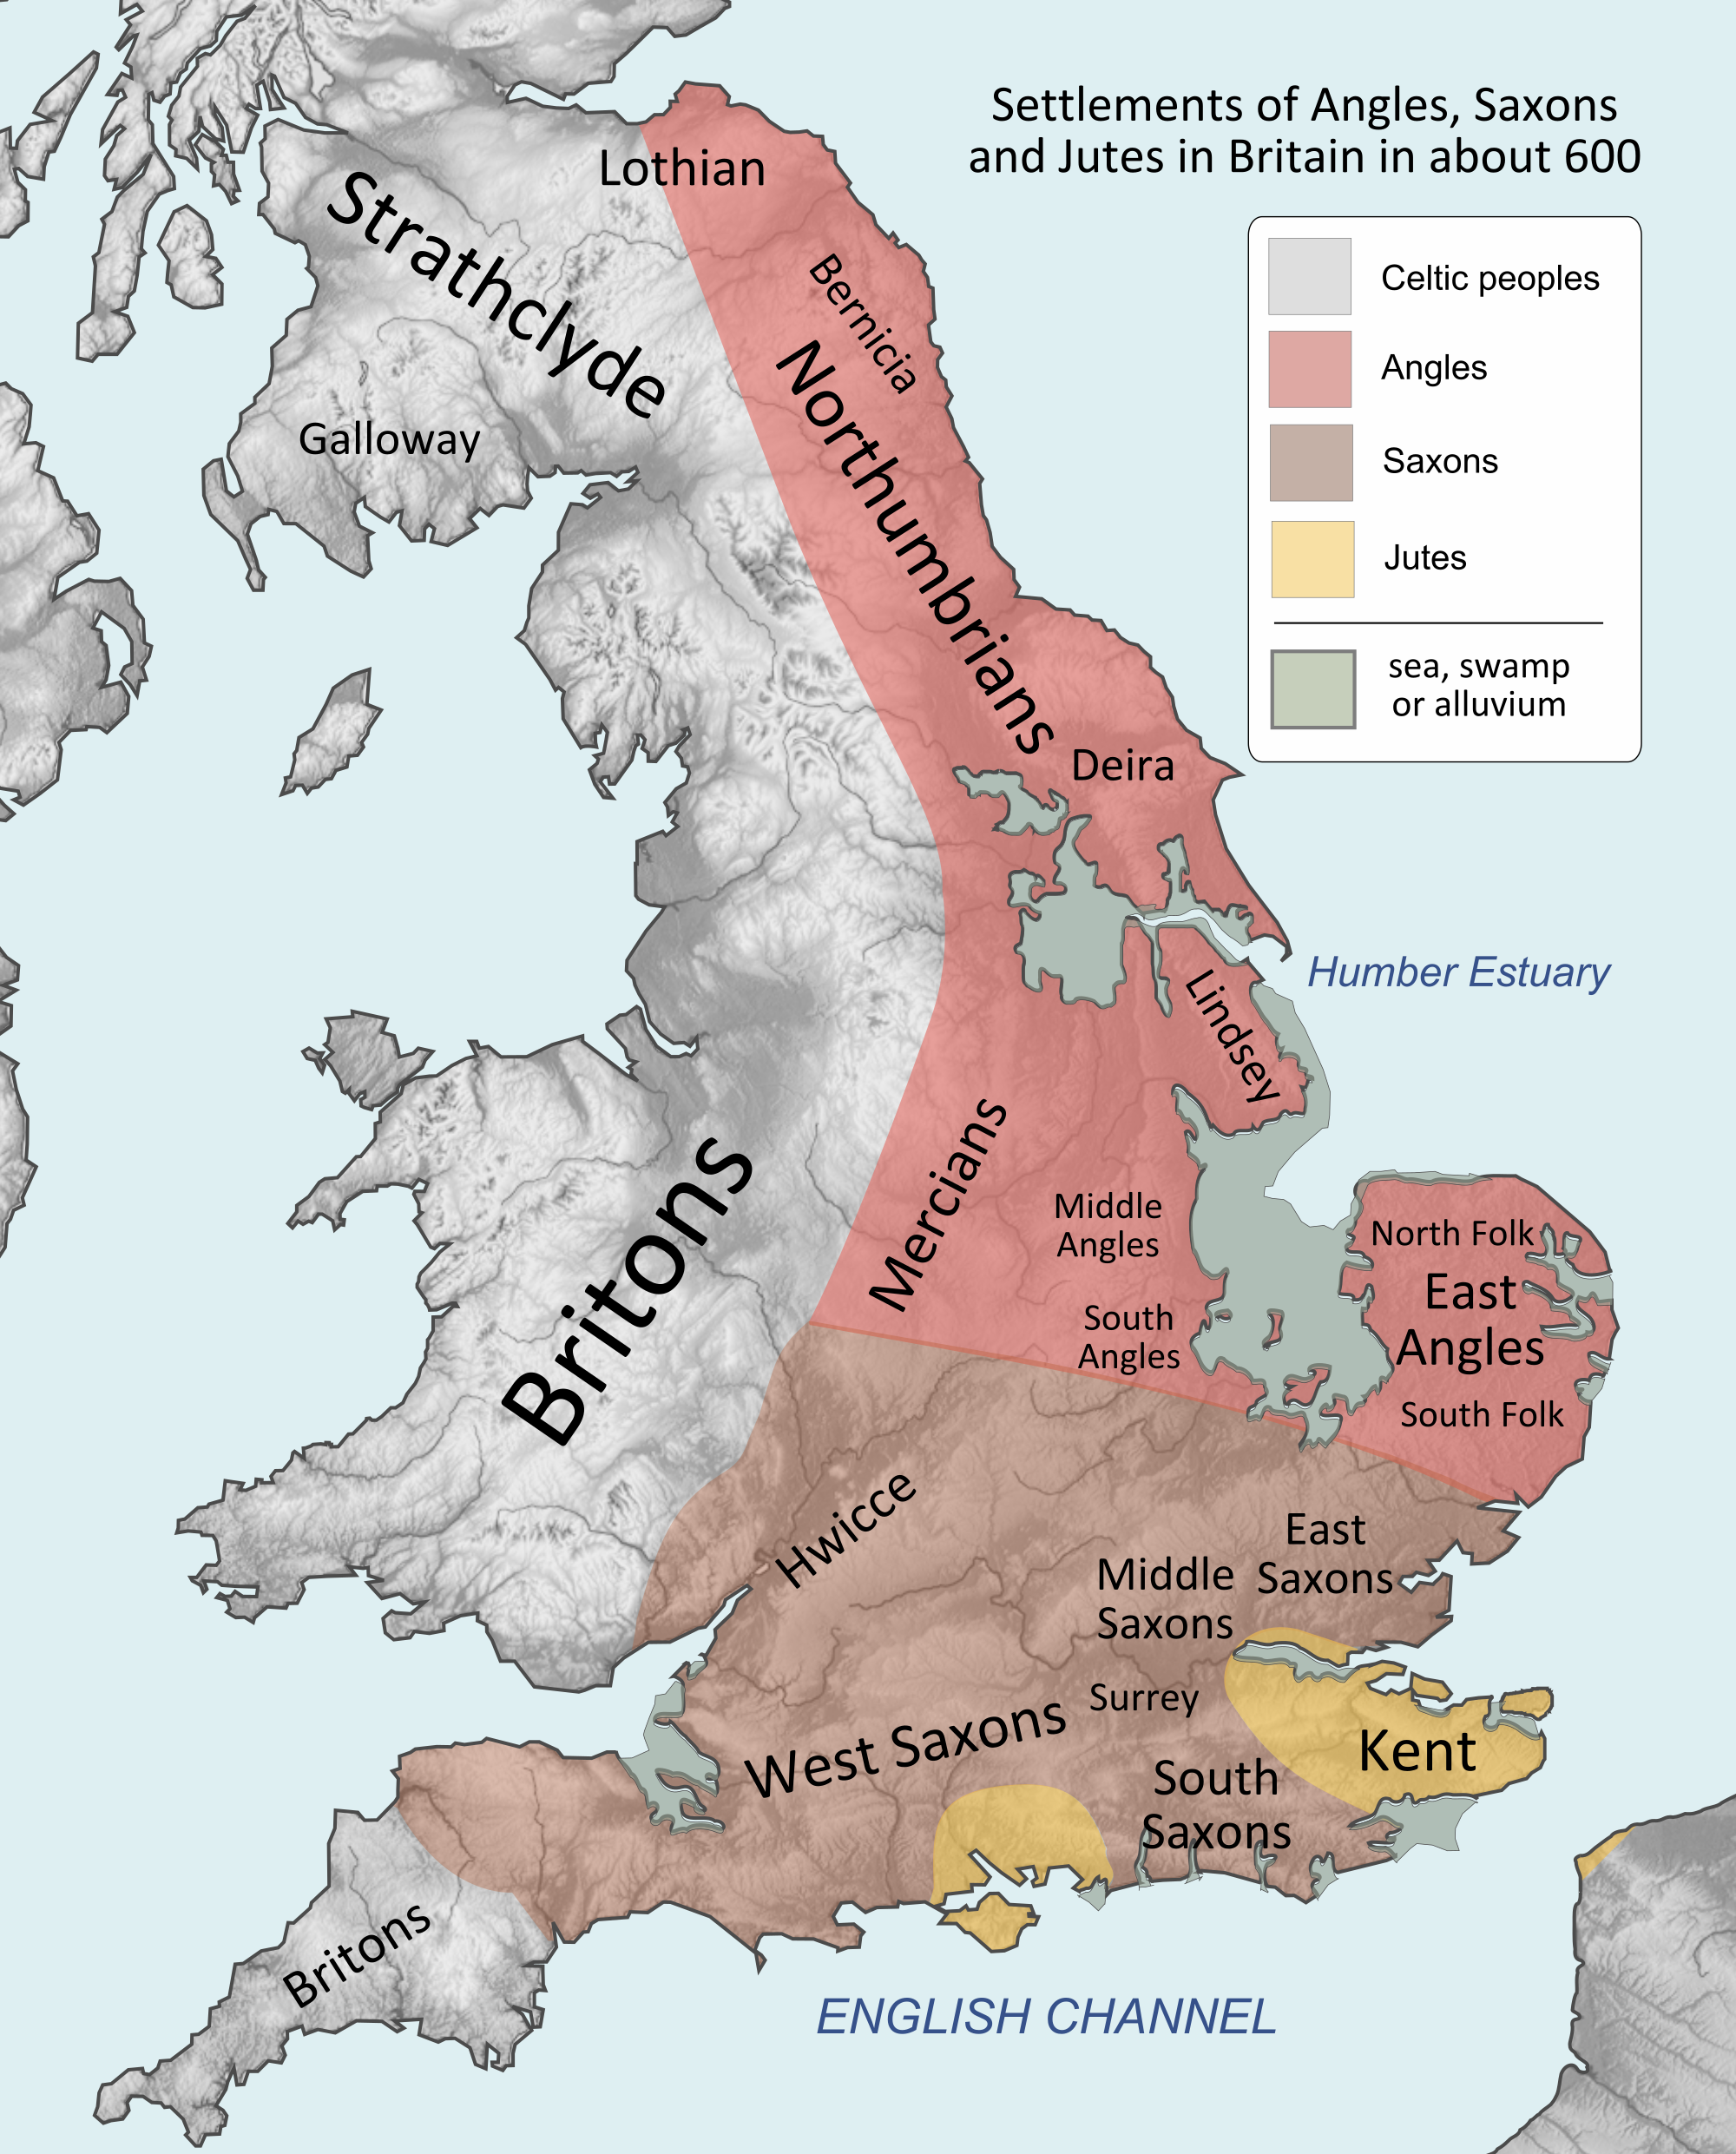 Map of southern Great Britain in 600 CE, showing regions of Angle, Saxon, Jute, and native Briton control.